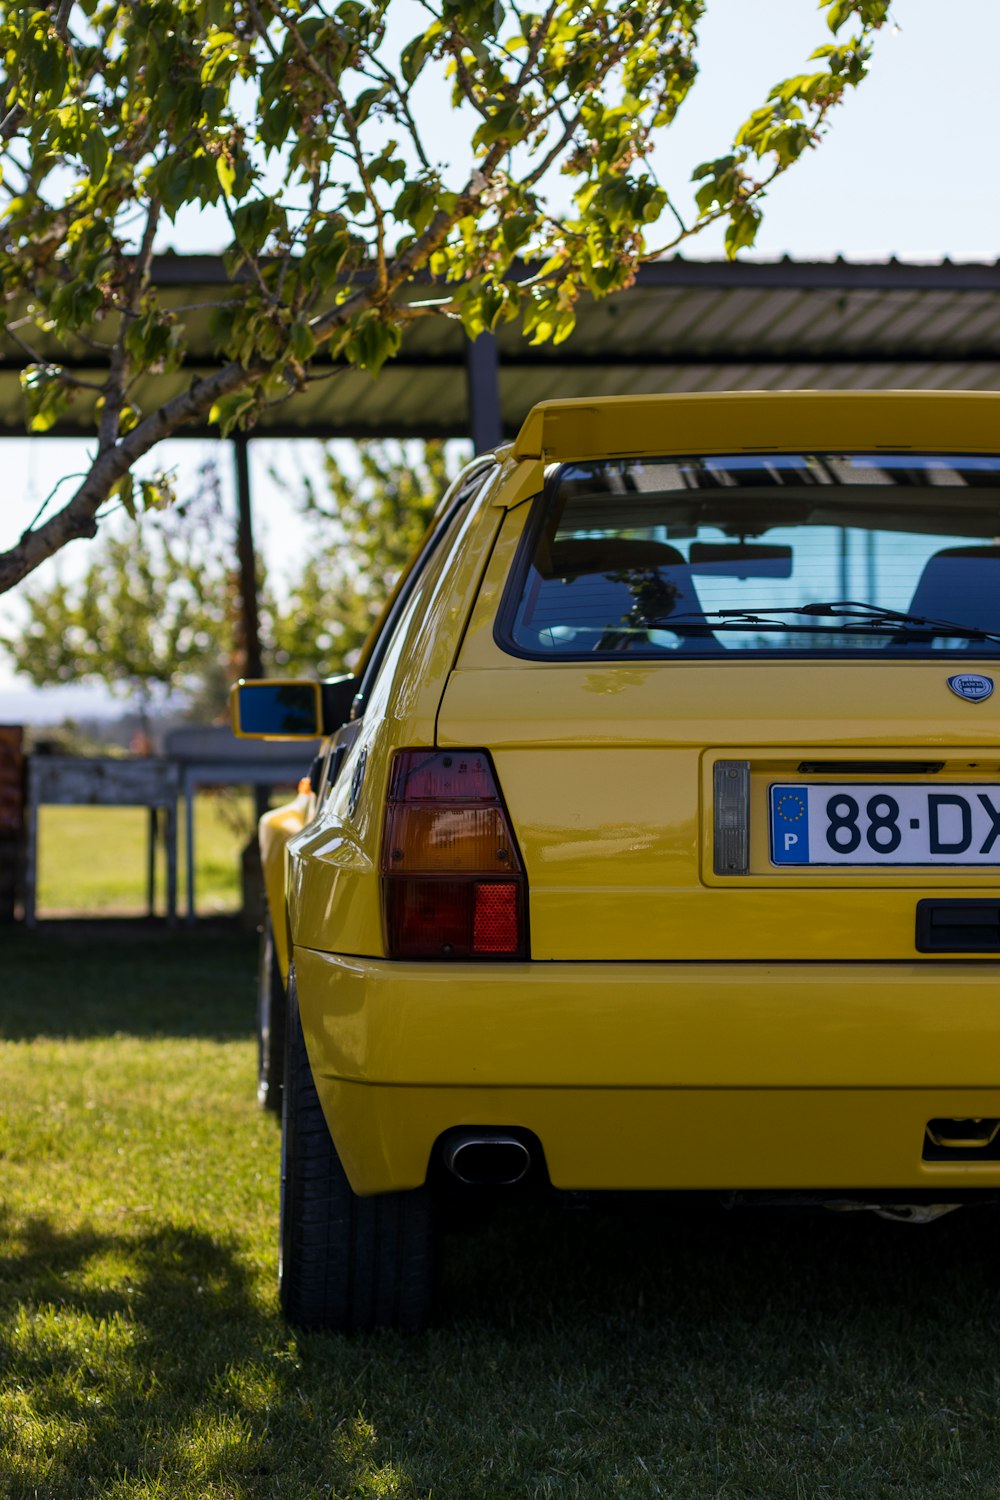 a yellow car parked in the grass under a tree